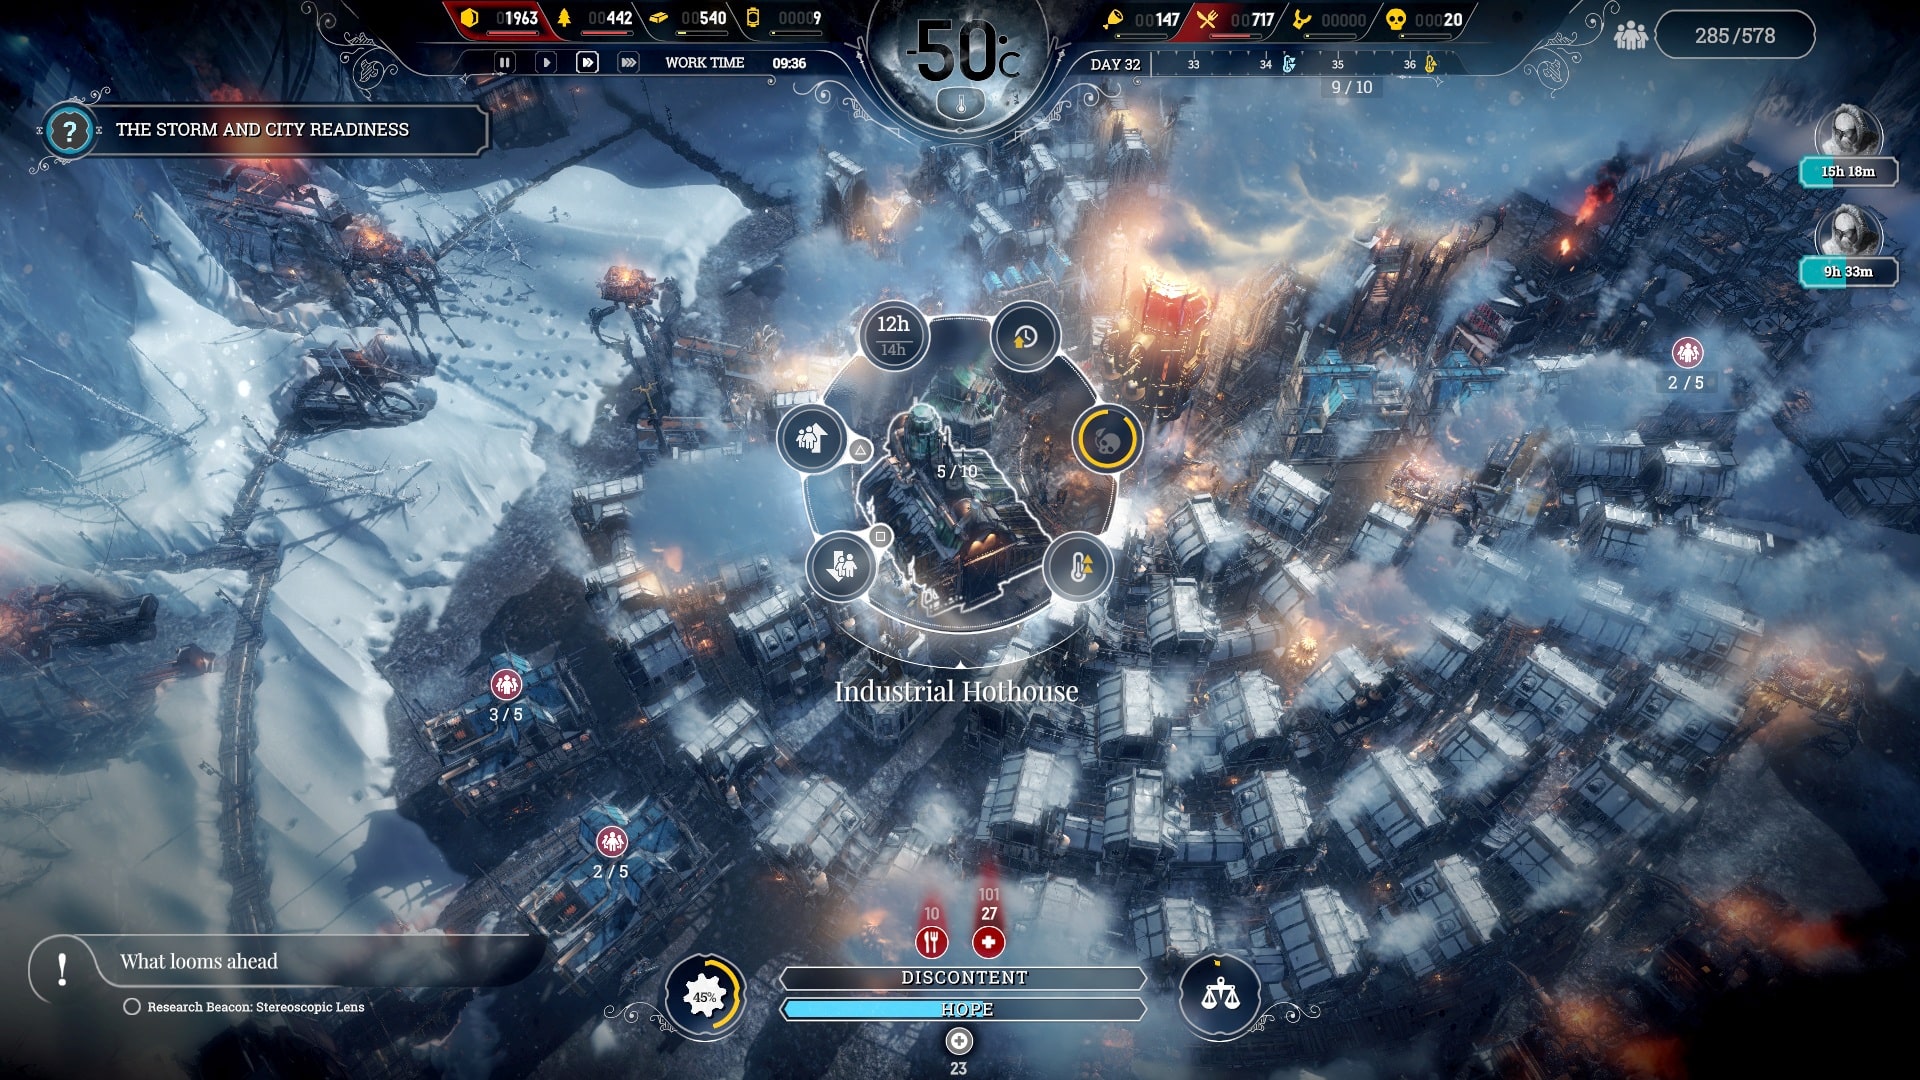 frostpunk on the edge ps4